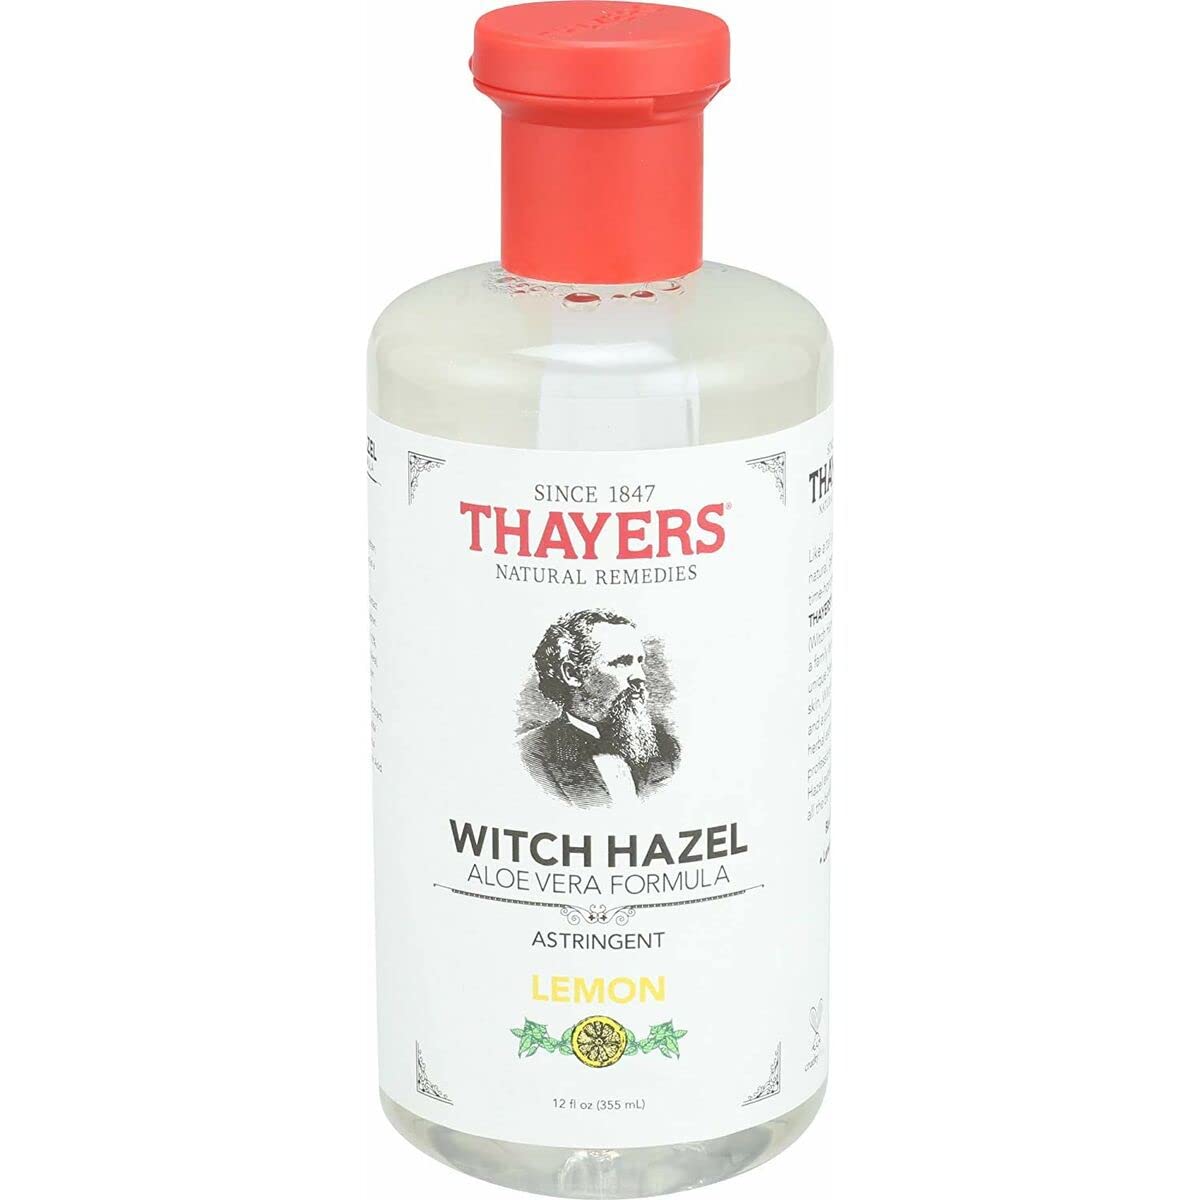 12-Oz Thayers Witch Hazel with Aloe Vera (Rose Petal) $4.35 + Free Shipping w/ Prime or on $25+